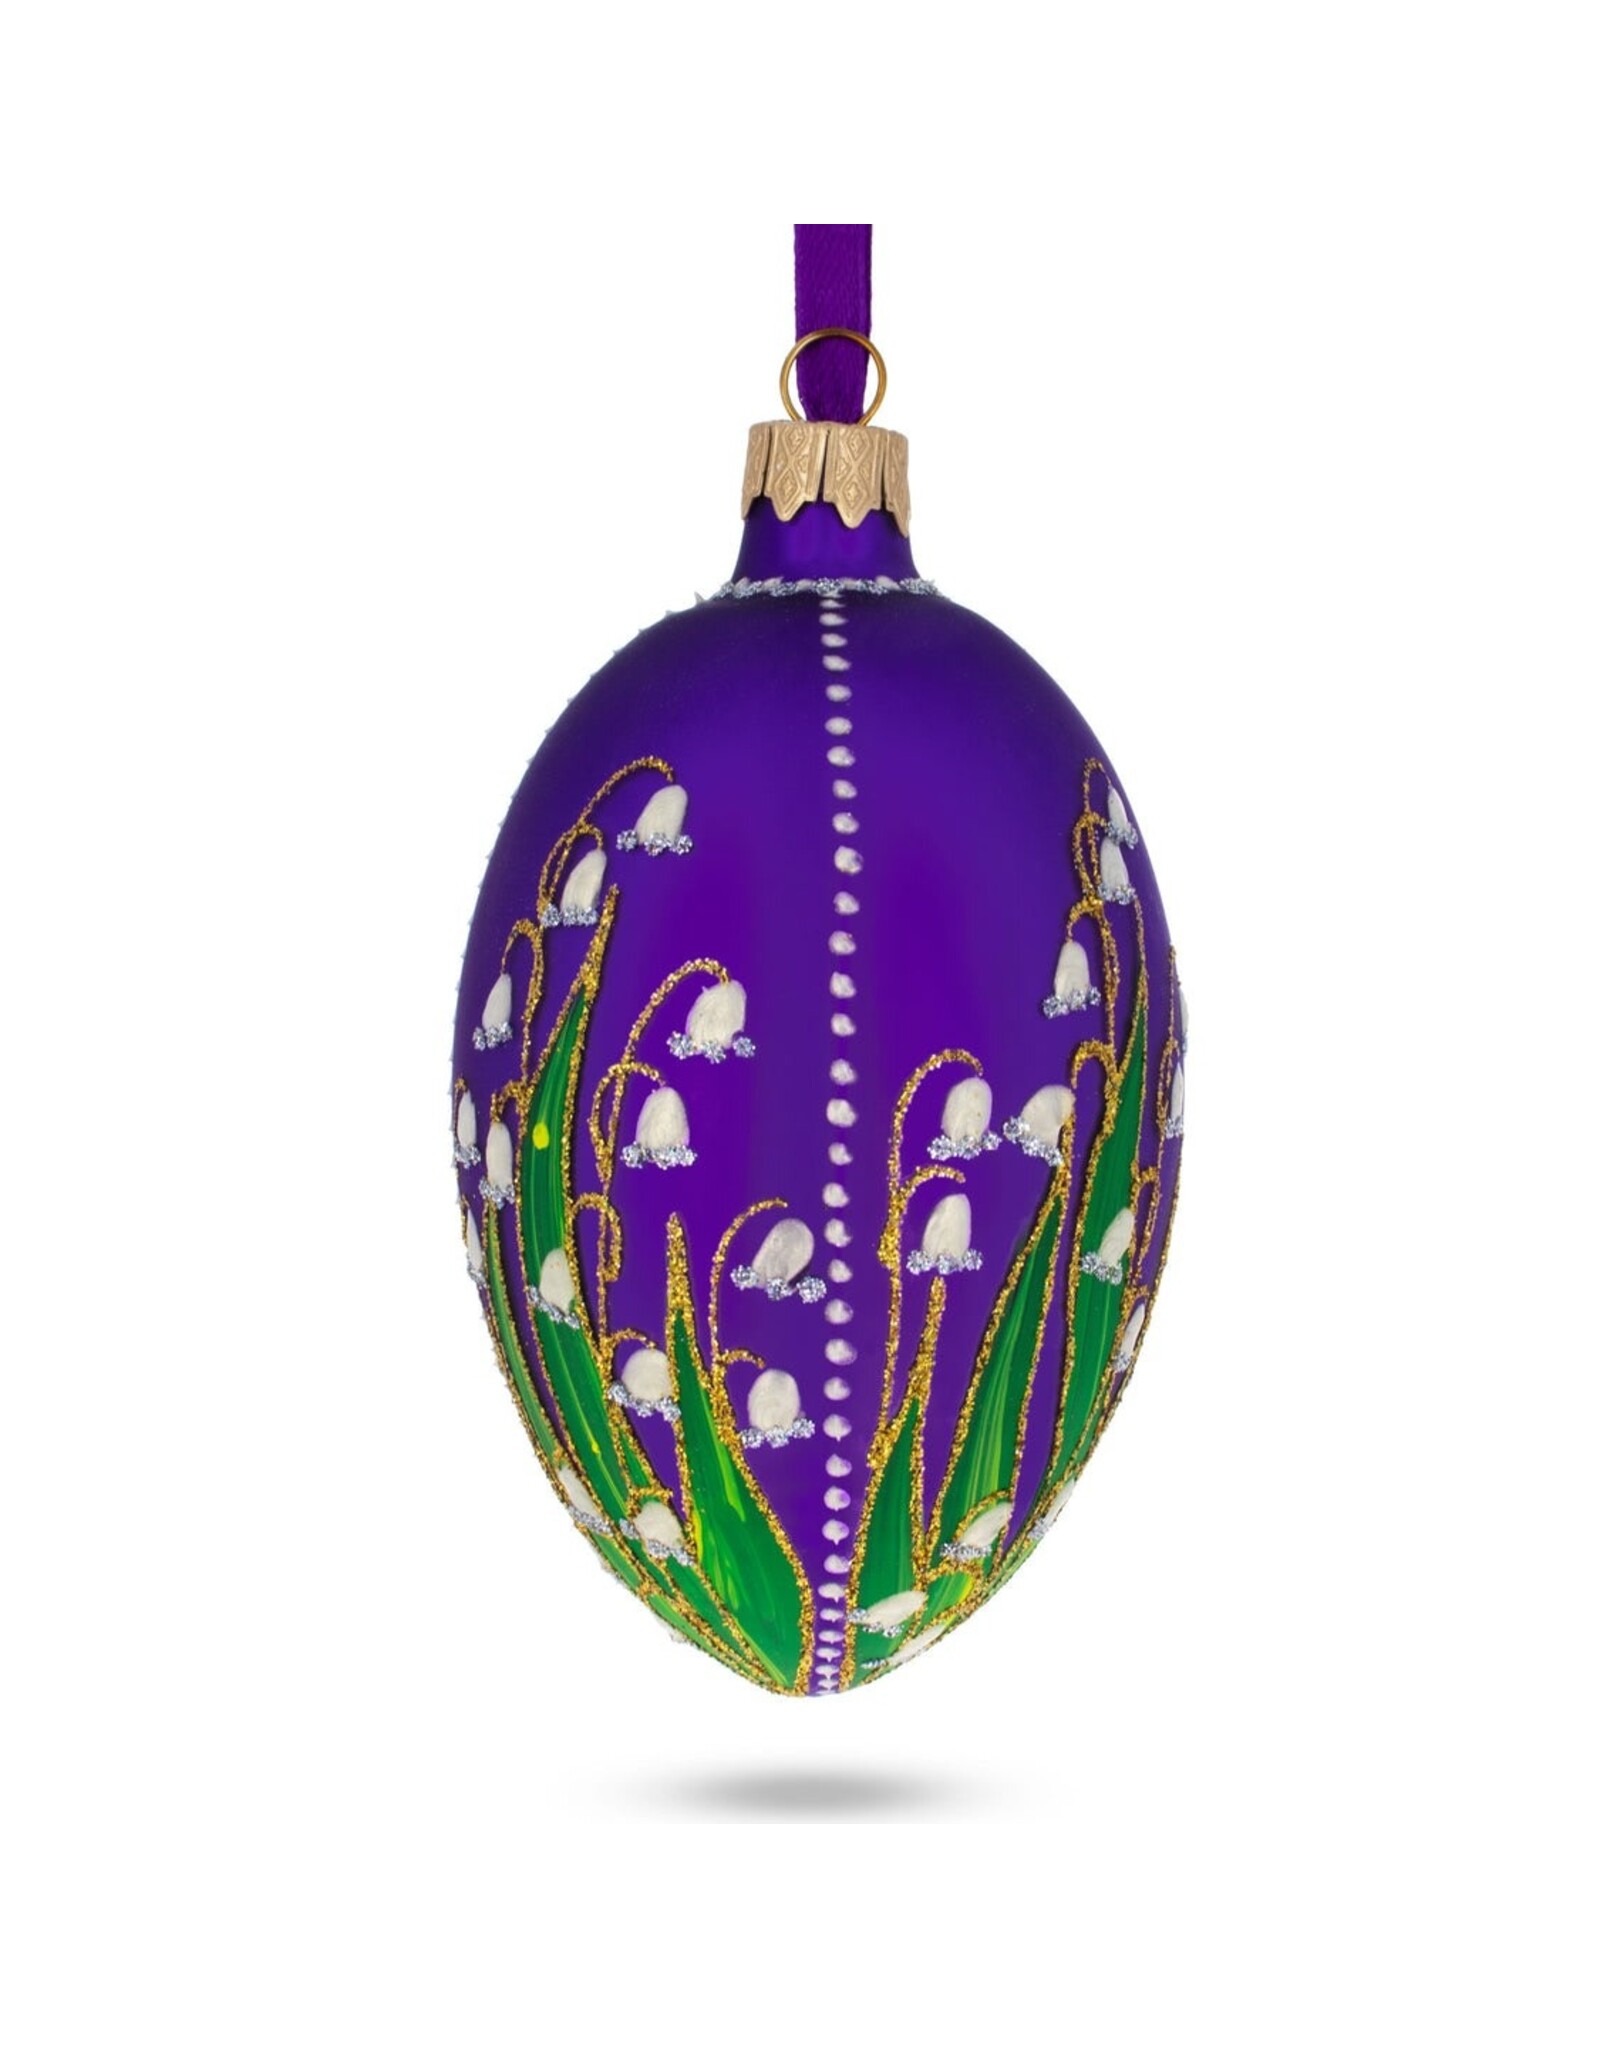 Lily of the Valley on Purple Glass Egg Ornament